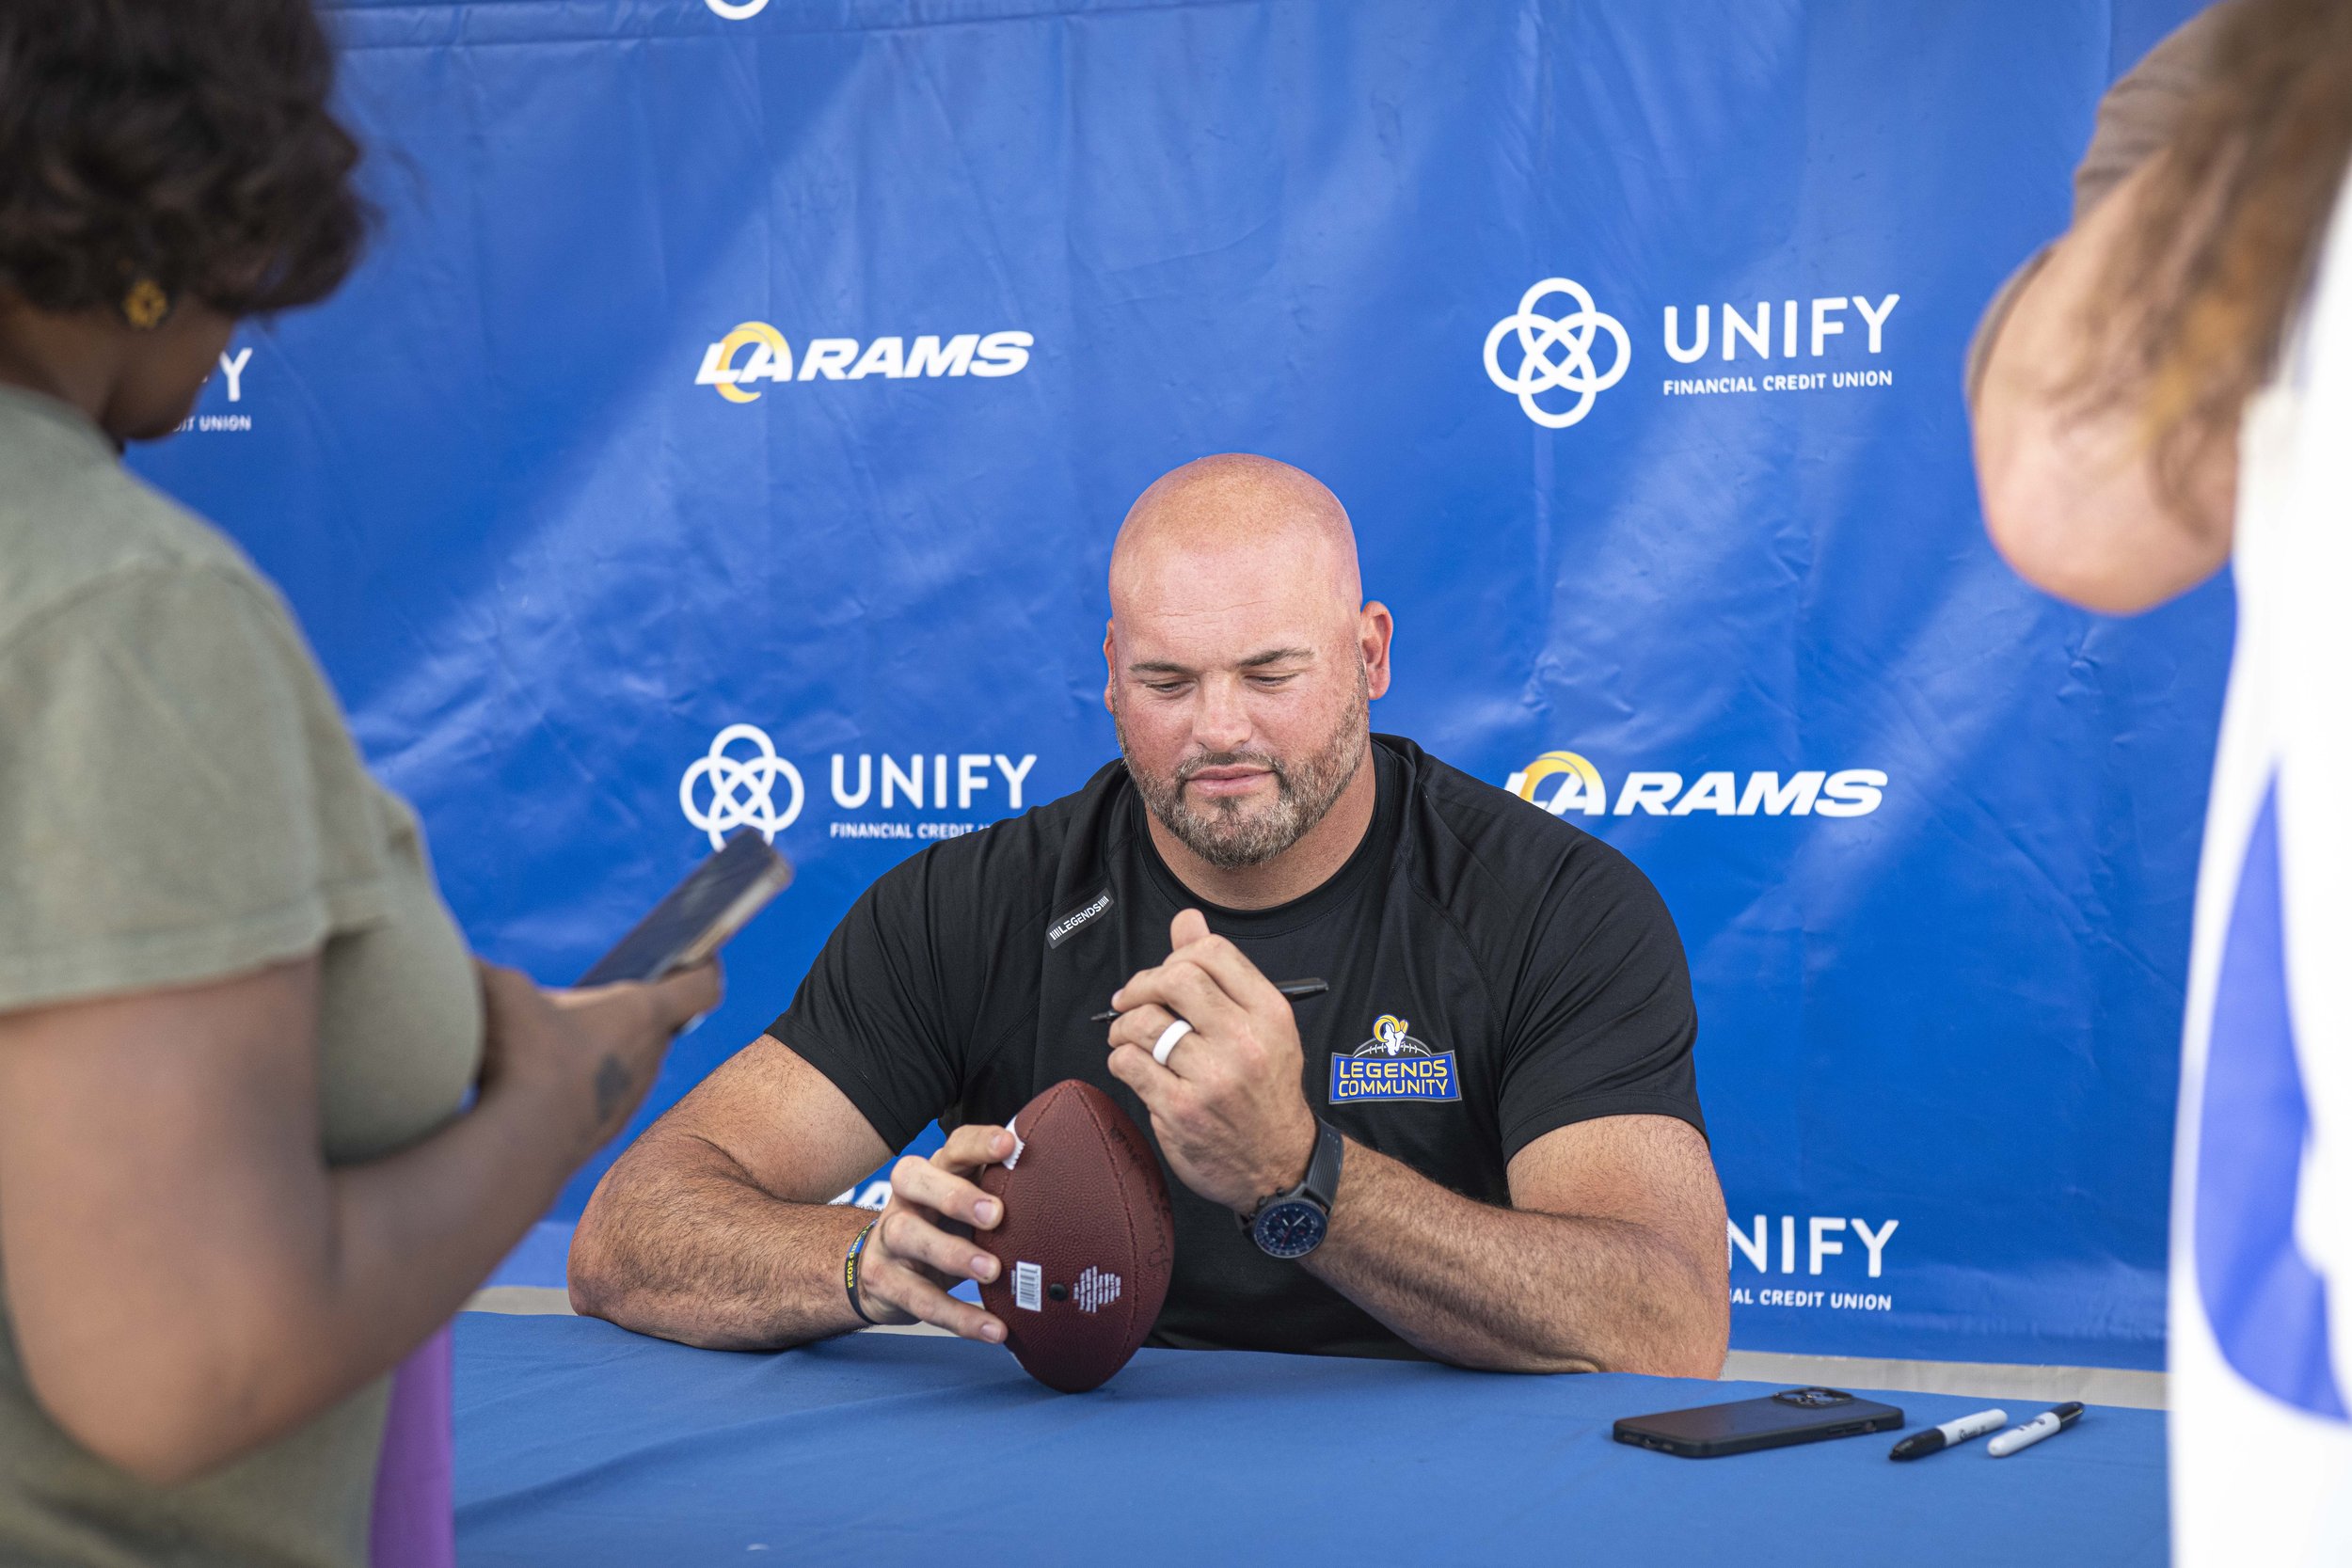  Andrew Whitworth former lineman for the Los Angeles rams signs autographs for fands before the team officially started their first day of trainging camp. (Jon Putman | The Corsair) 